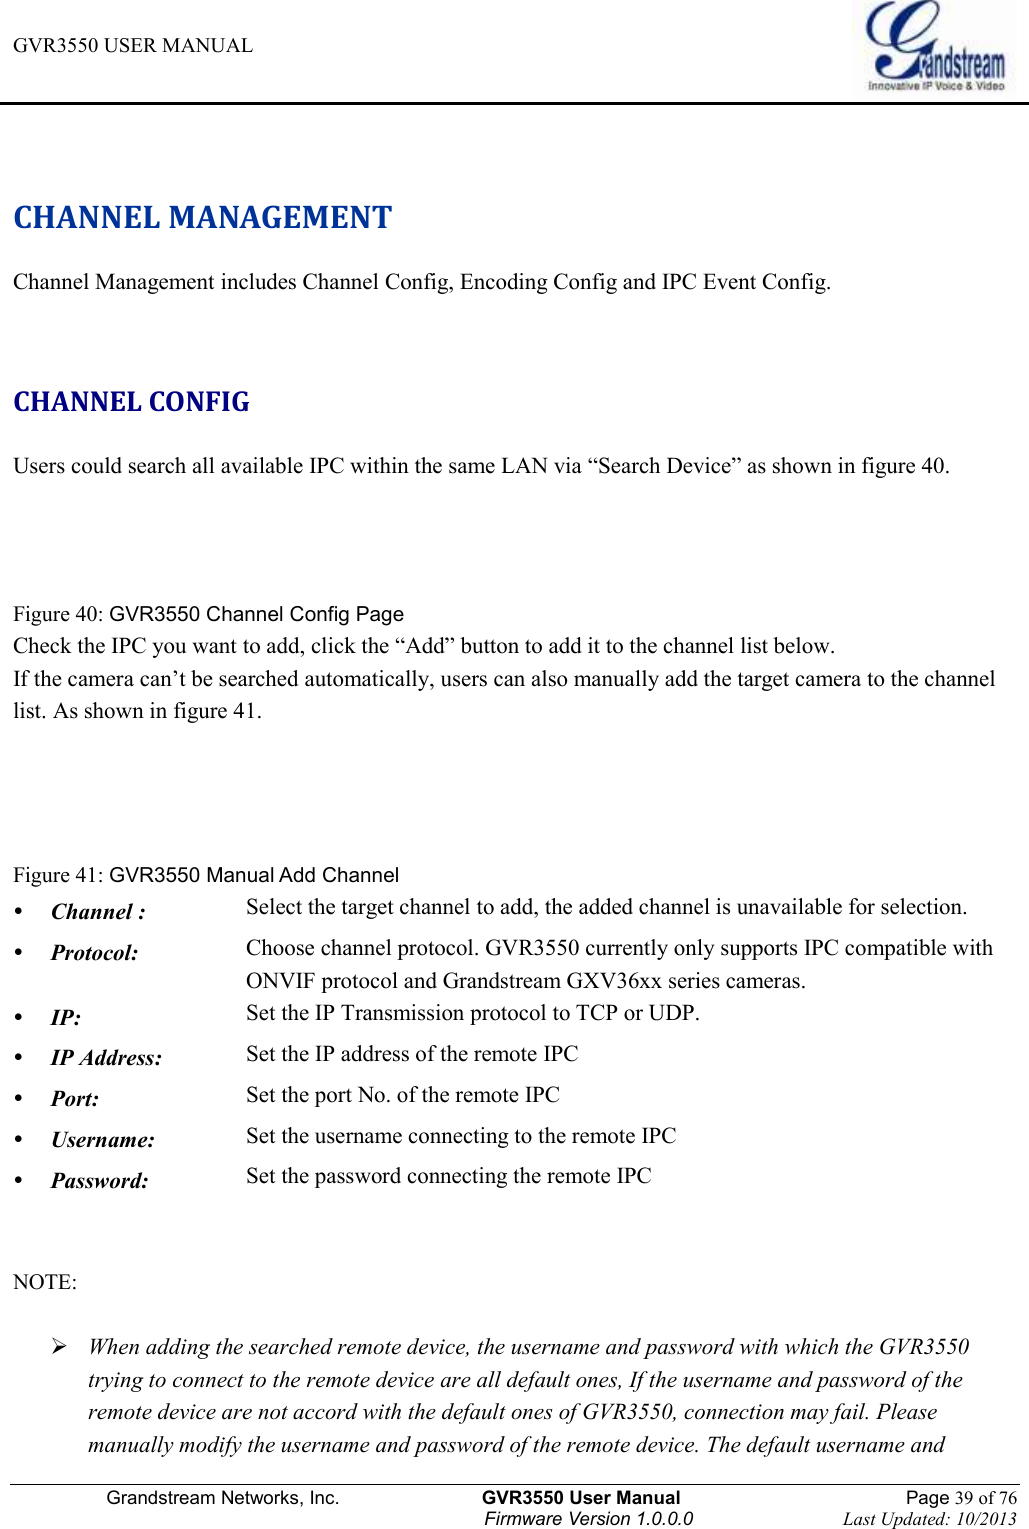 GVR3550 USER MANUAL   Grandstream Networks, Inc.                    GVR3550 User Manual                                                Page 39 of 76 Firmware Version 1.0.0.0                                Last Updated: 10/2013   CHANNEL MANAGEMENT Channel Management includes Channel Config, Encoding Config and IPC Event Config.  CHANNEL CONFIG Users could search all available IPC within the same LAN via “Search Device” as shown in figure 40.   Figure 40: GVR3550 Channel Config Page Check the IPC you want to add, click the “Add” button to add it to the channel list below. If the camera can’t be searched automatically, users can also manually add the target camera to the channel list. As shown in figure 41.   Figure 41: GVR3550 Manual Add Channel  Channel : Select the target channel to add, the added channel is unavailable for selection.  Protocol: Choose channel protocol. GVR3550 currently only supports IPC compatible with ONVIF protocol and Grandstream GXV36xx series cameras.  IP: Set the IP Transmission protocol to TCP or UDP.  IP Address: Set the IP address of the remote IPC  Port: Set the port No. of the remote IPC  Username: Set the username connecting to the remote IPC  Password: Set the password connecting the remote IPC  NOTE:     When adding the searched remote device, the username and password with which the GVR3550 trying to connect to the remote device are all default ones, If the username and password of the remote device are not accord with the default ones of GVR3550, connection may fail. Please manually modify the username and password of the remote device. The default username and 